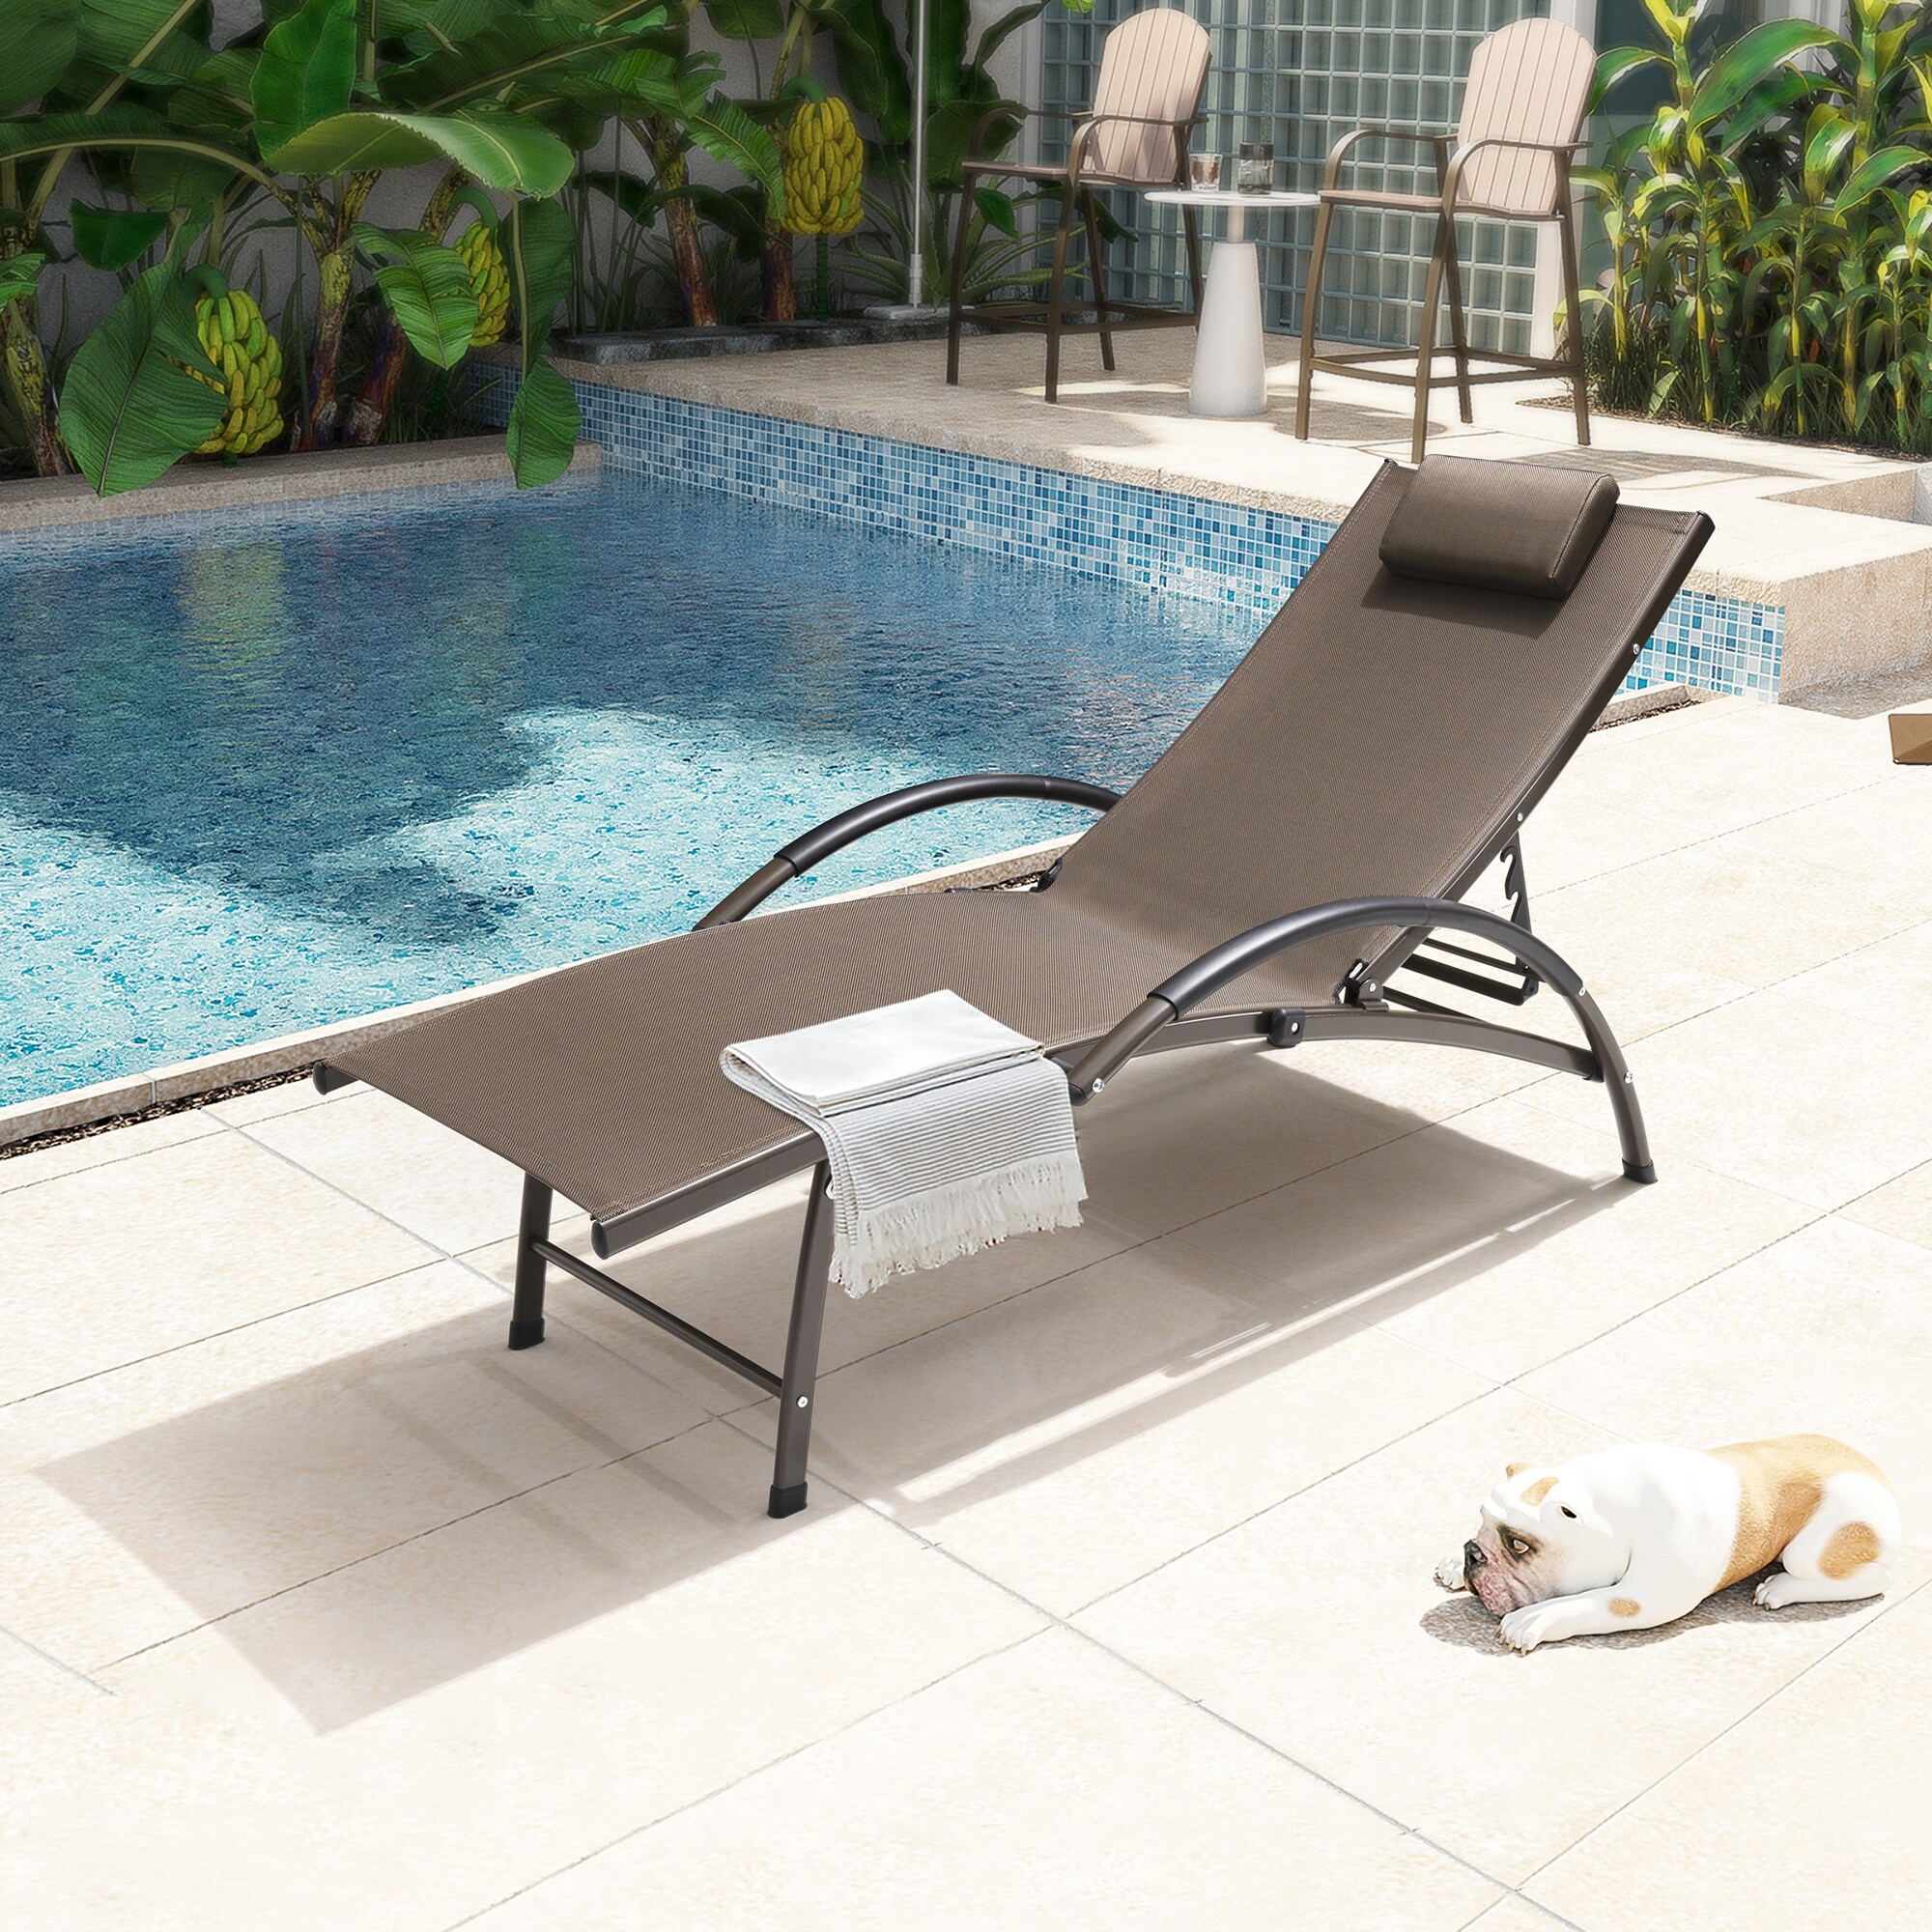 Vineego Set of 2 Patio Outdoor Chaise Lounge Chair Recliner with Adjustable  Backrest, Light Taupe